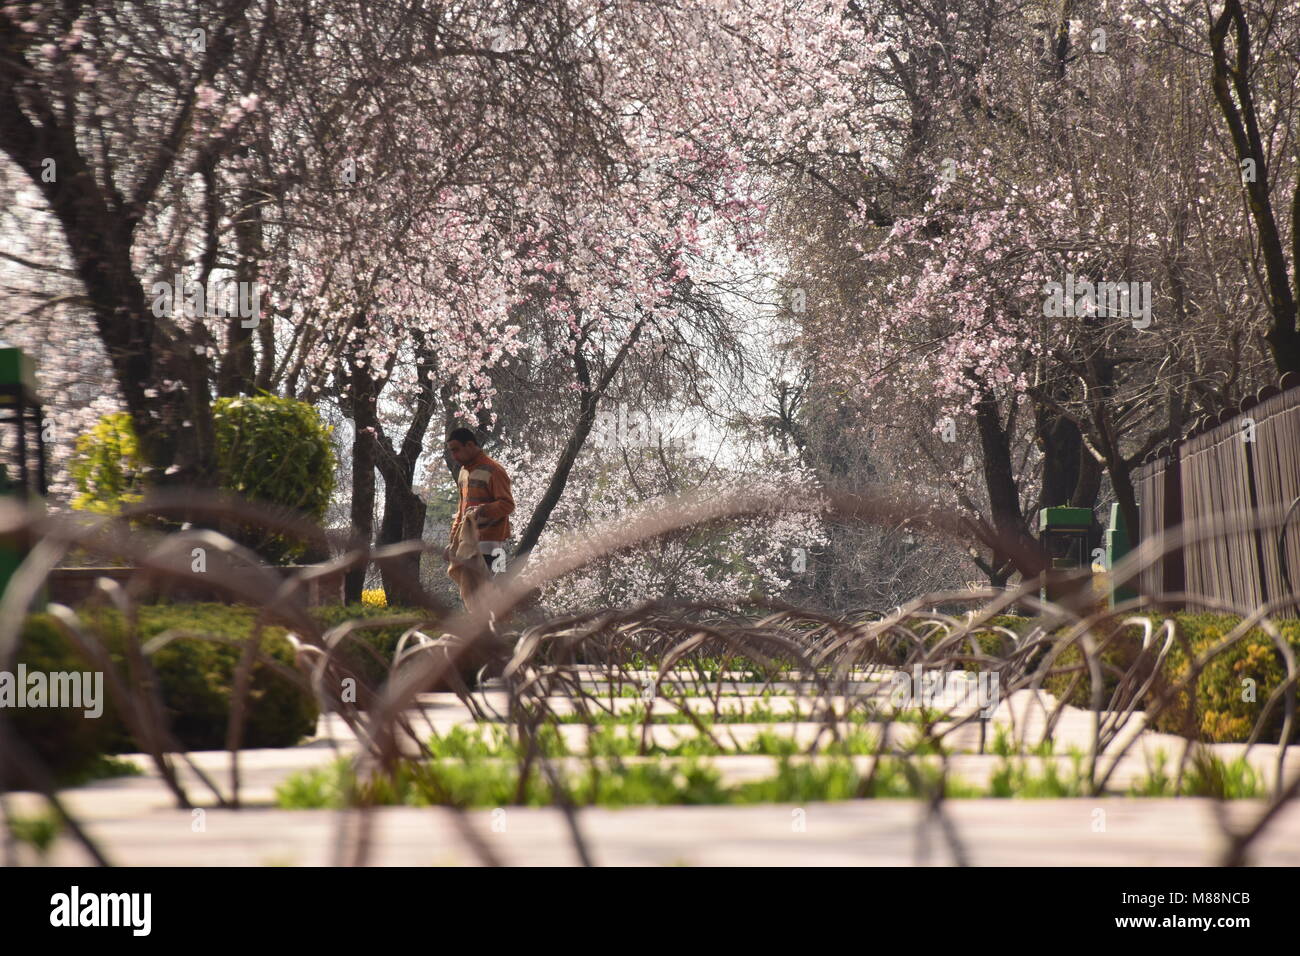 Srinagar, India. 10th Mar, 2018. Kashmiri men walks through the bloomed almond trees in an almond orchard known by Badam Waer In Srinagar. The white and pink flowers of Almond trees are in full blossom which predicts the coming of spring. Almond trees are in full blossom due to early summer-like weather conditions in Kashmir valley, where very less snow was experienced this winter as compared to previous years. Credit: Abbas Idrees/Pacific Press/Alamy Live News Stock Photo